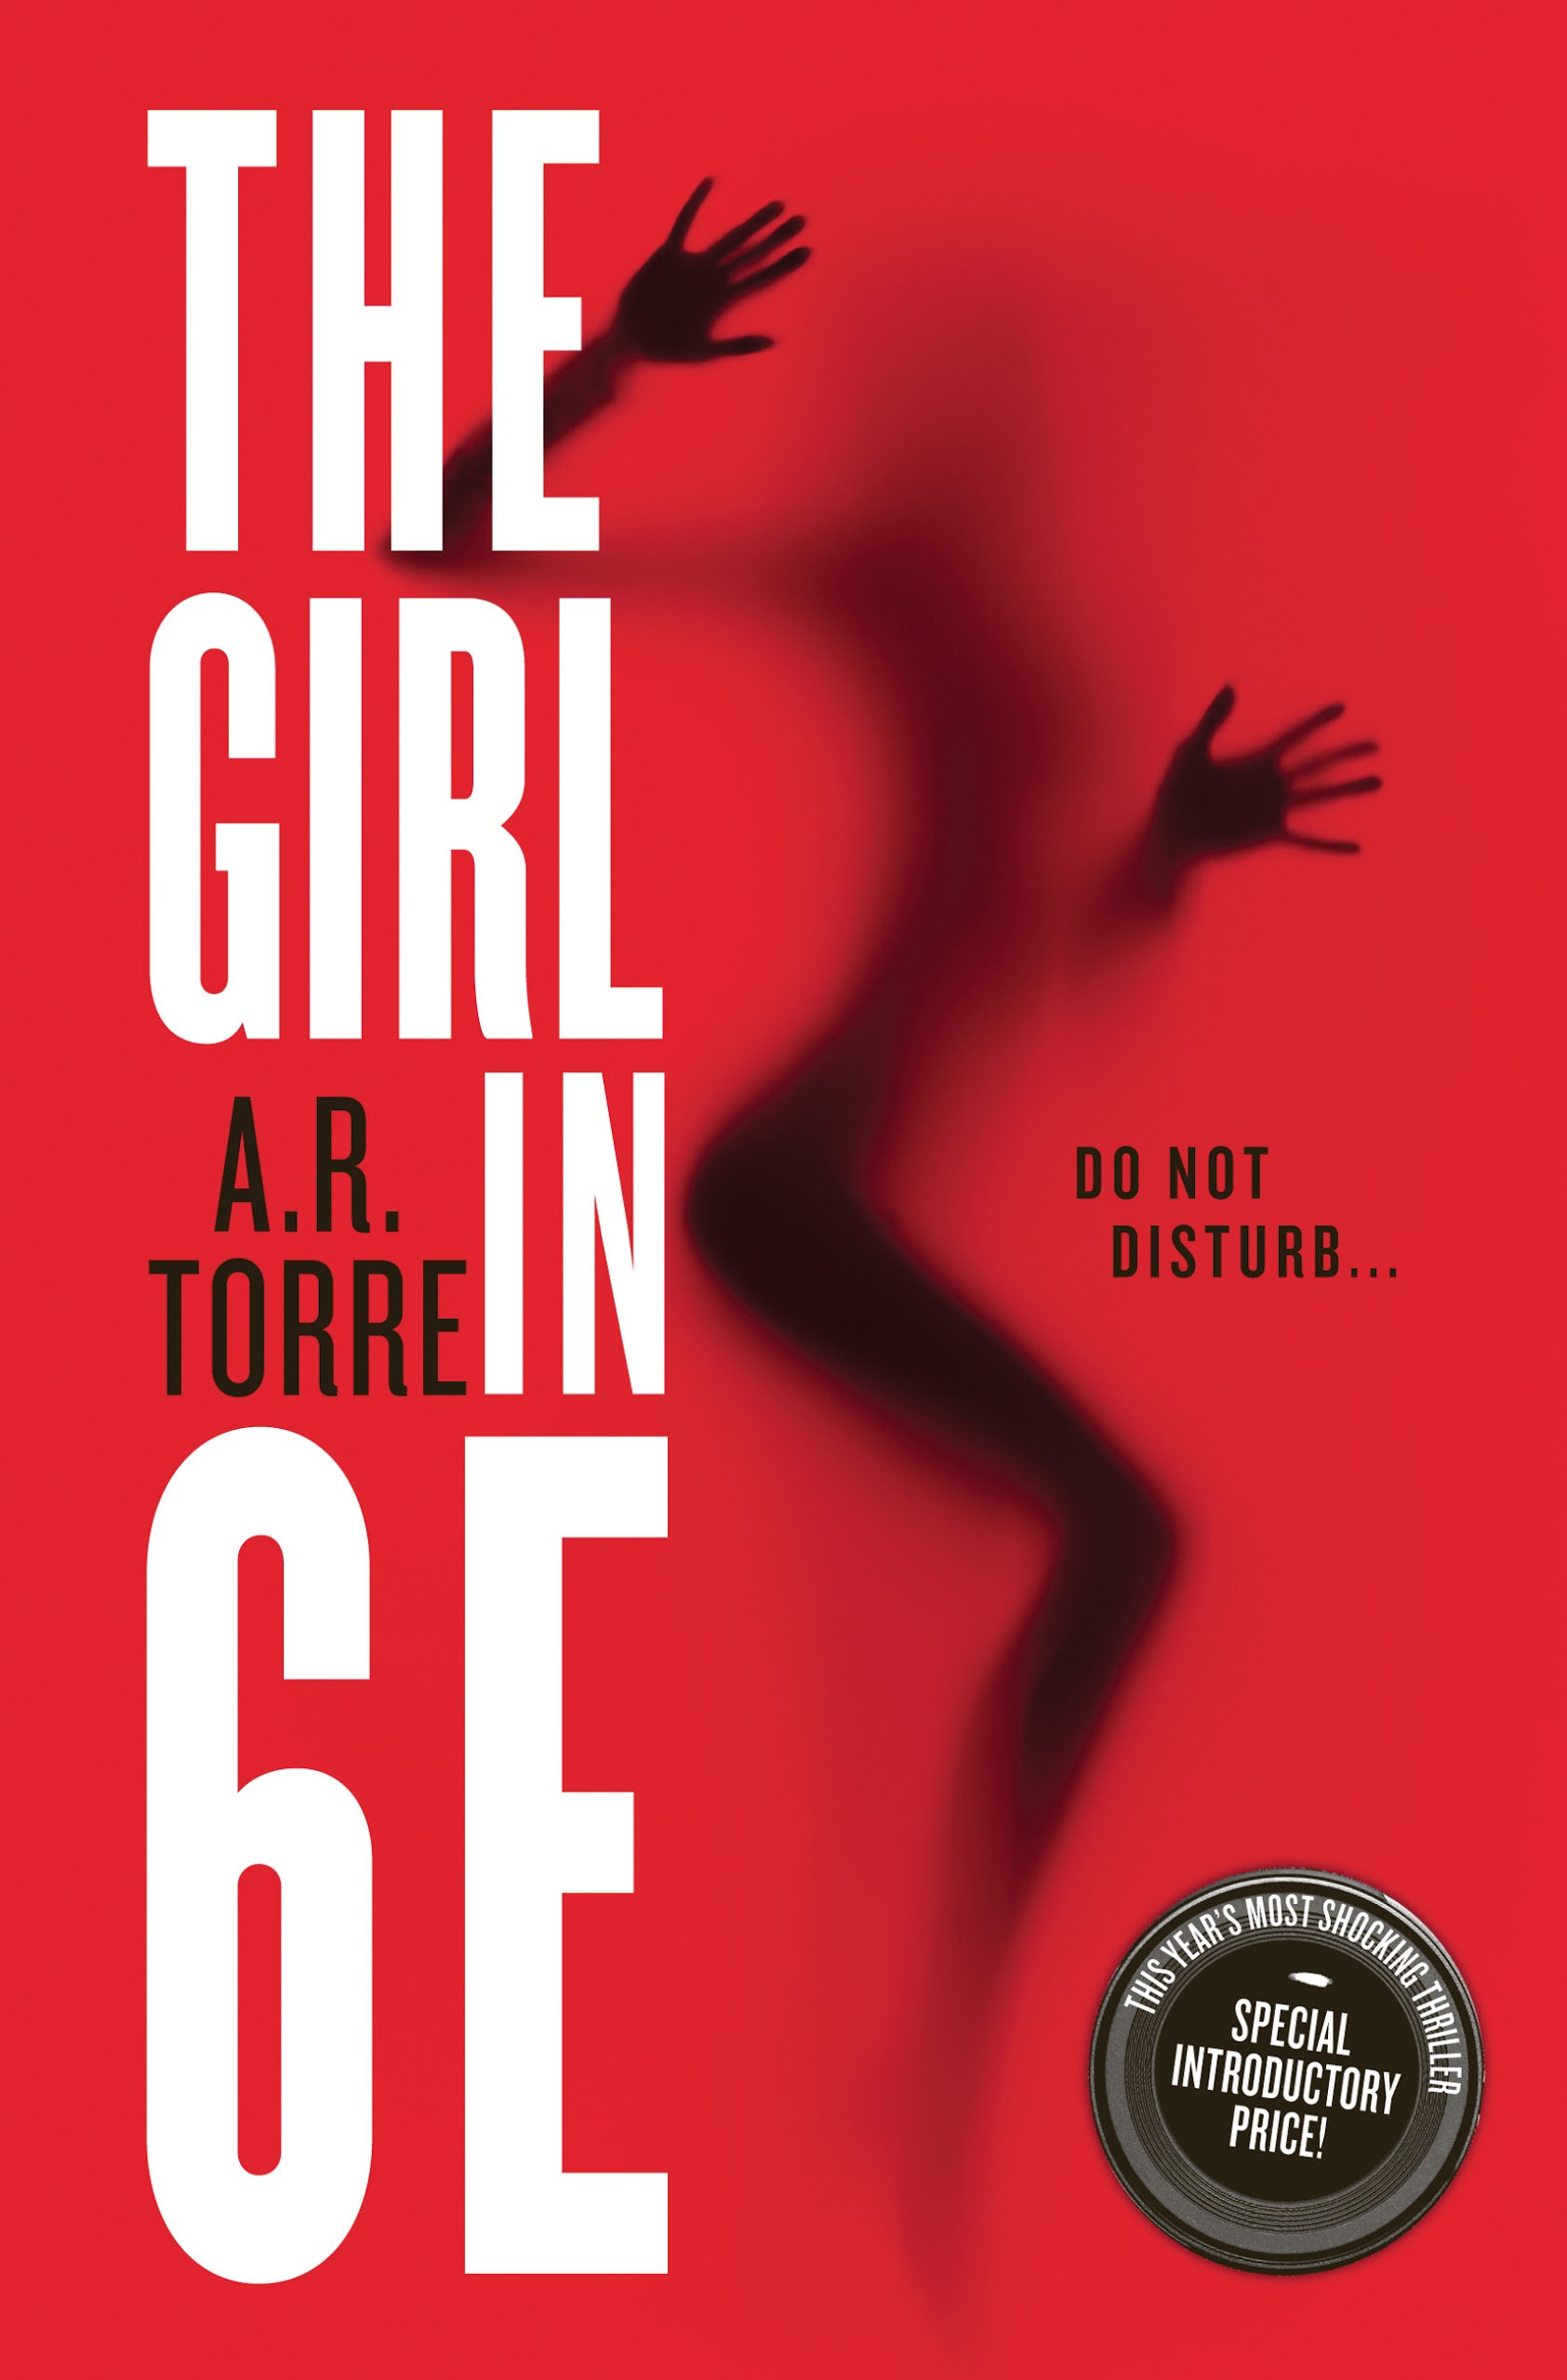 The Girl in 6E - Trailer & Review